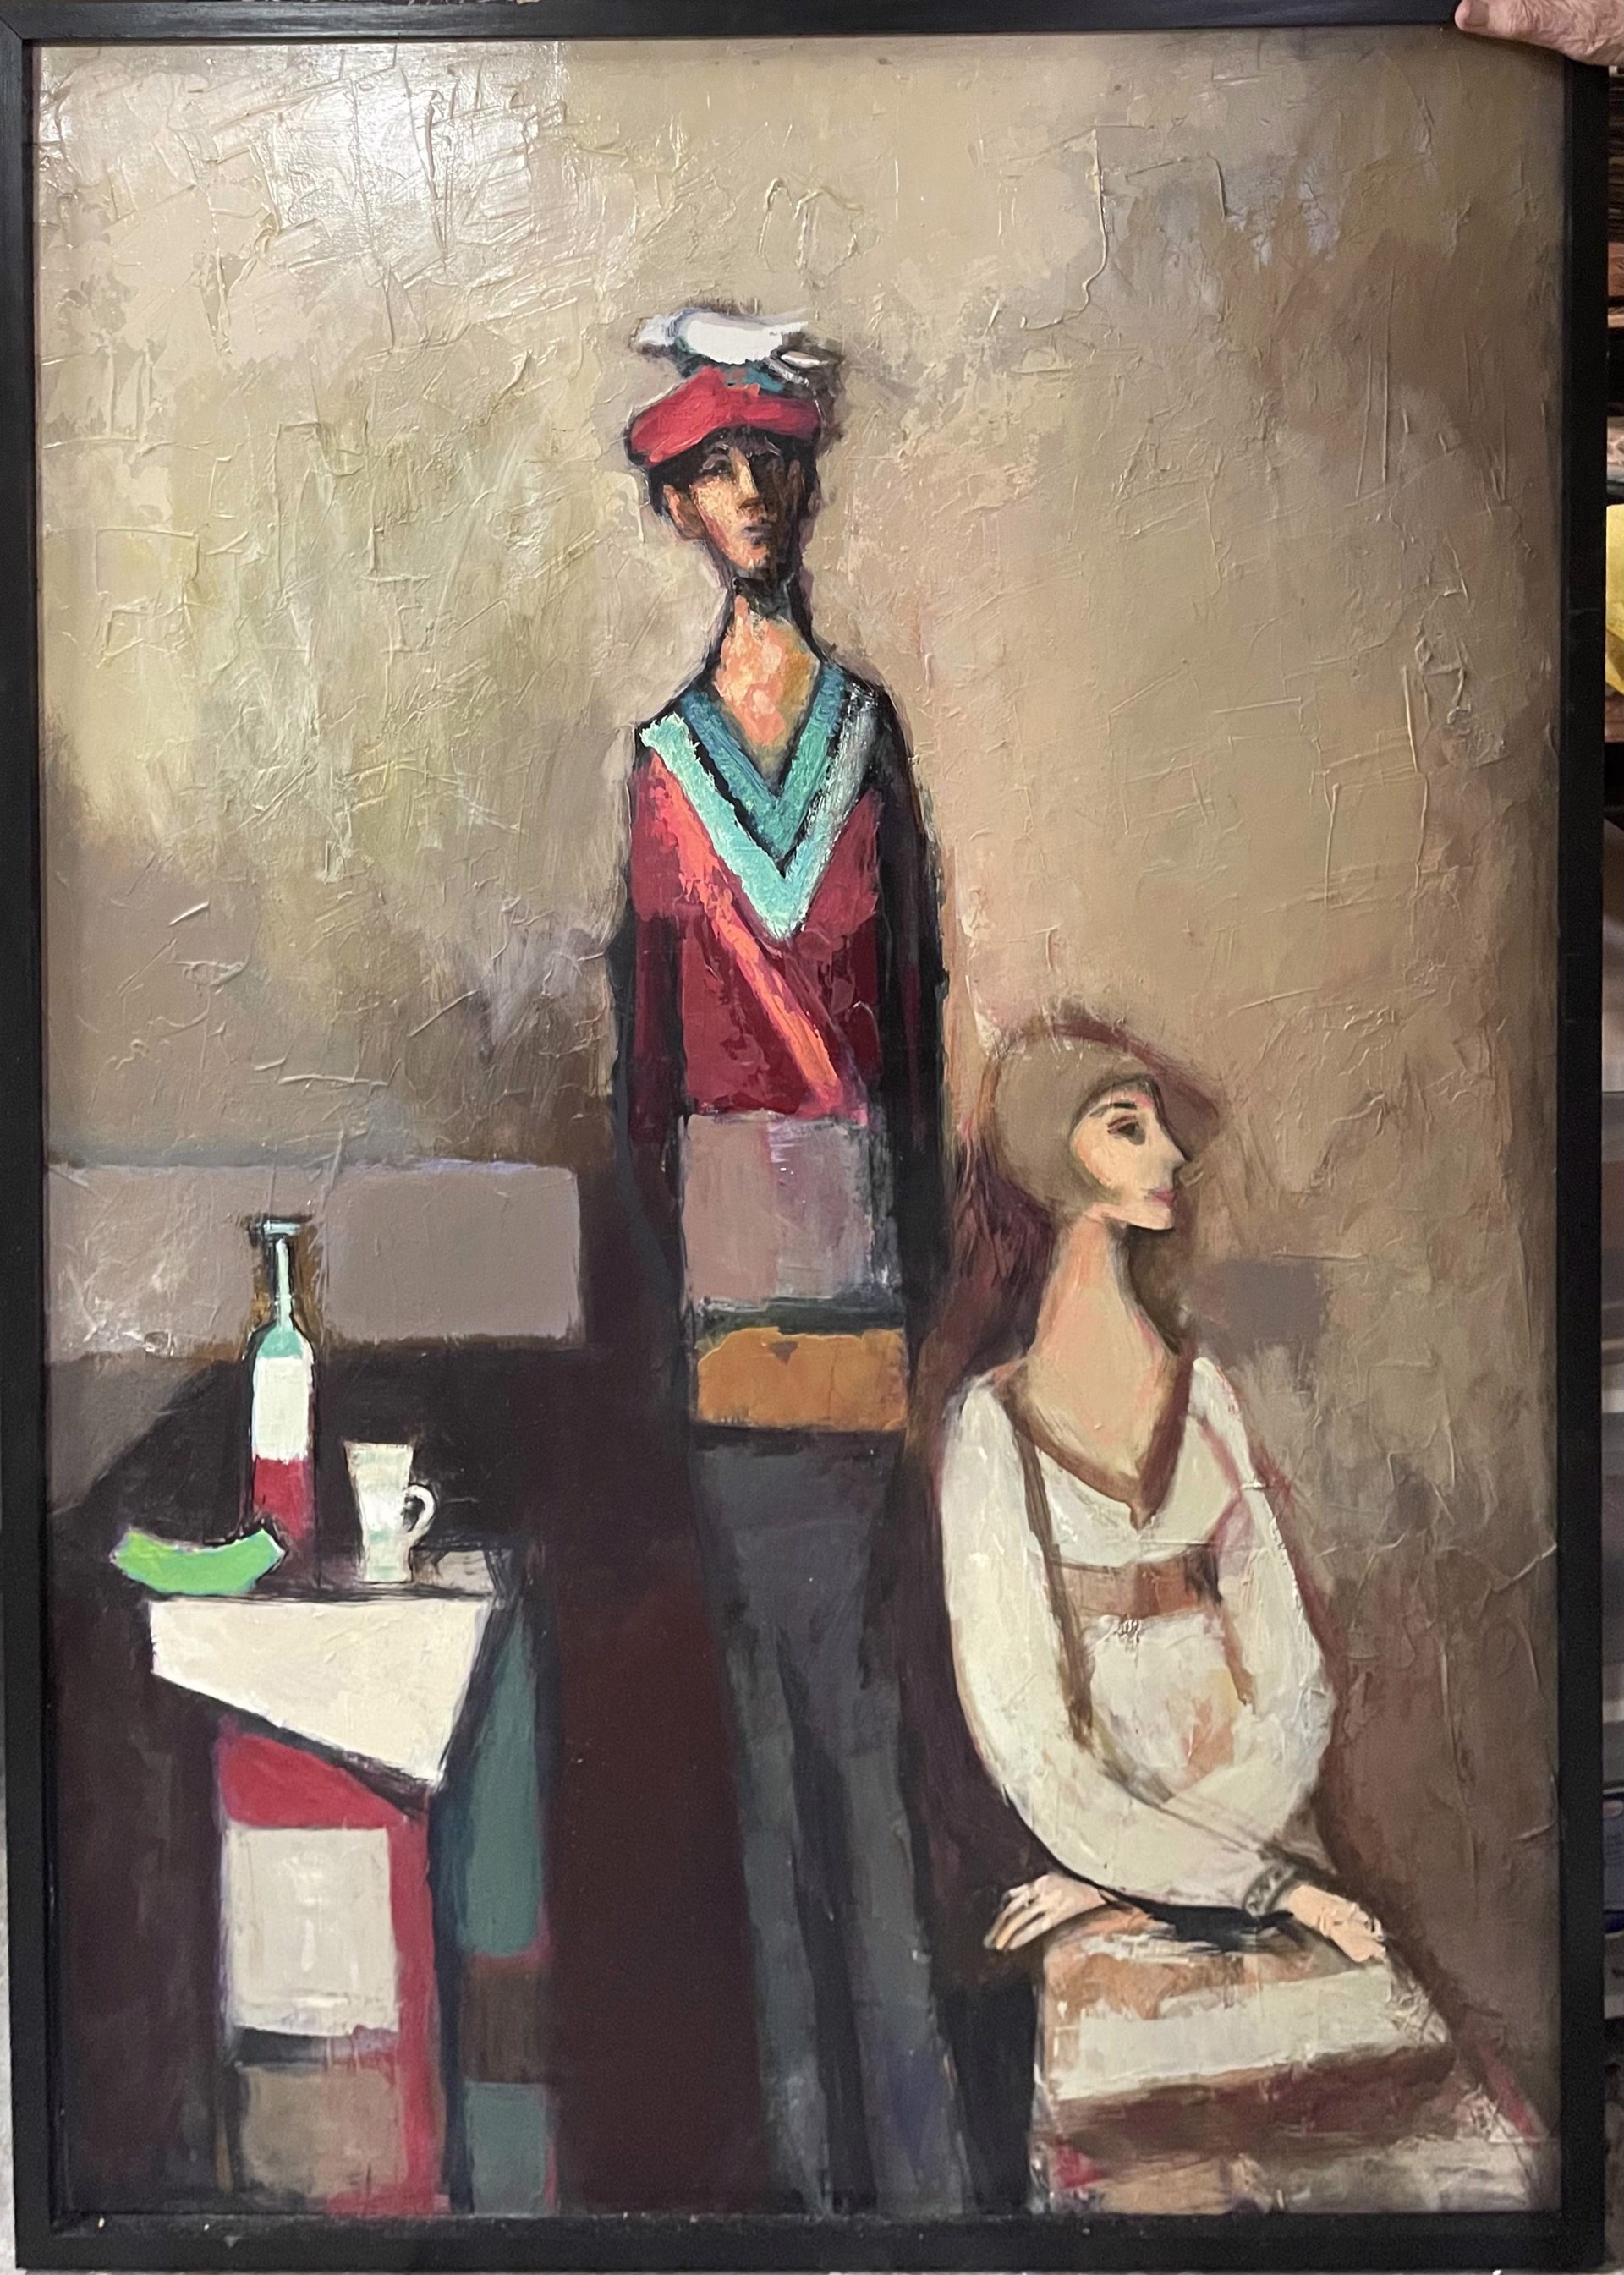 Man & Woman at Table with Bird Friend by David Adickes